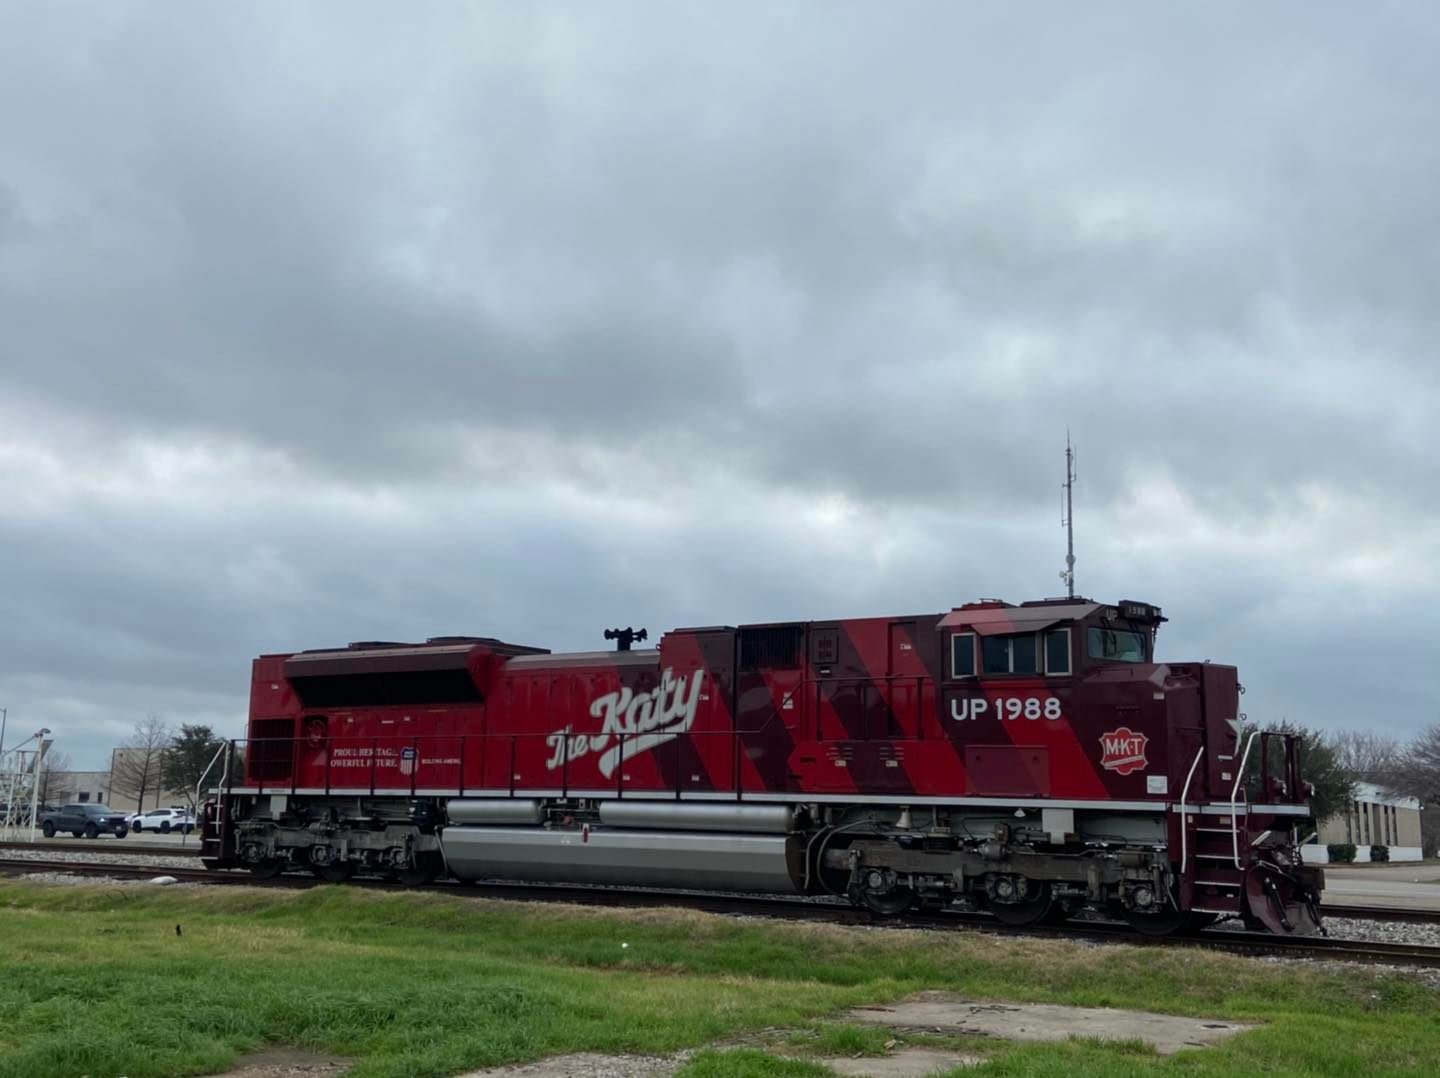 For the Jan. 14 celebration of the Katy Depot’s 125th anniversary, Union Pacific Railroad sent the famous M-K-T heritage locomotive to the festivities.